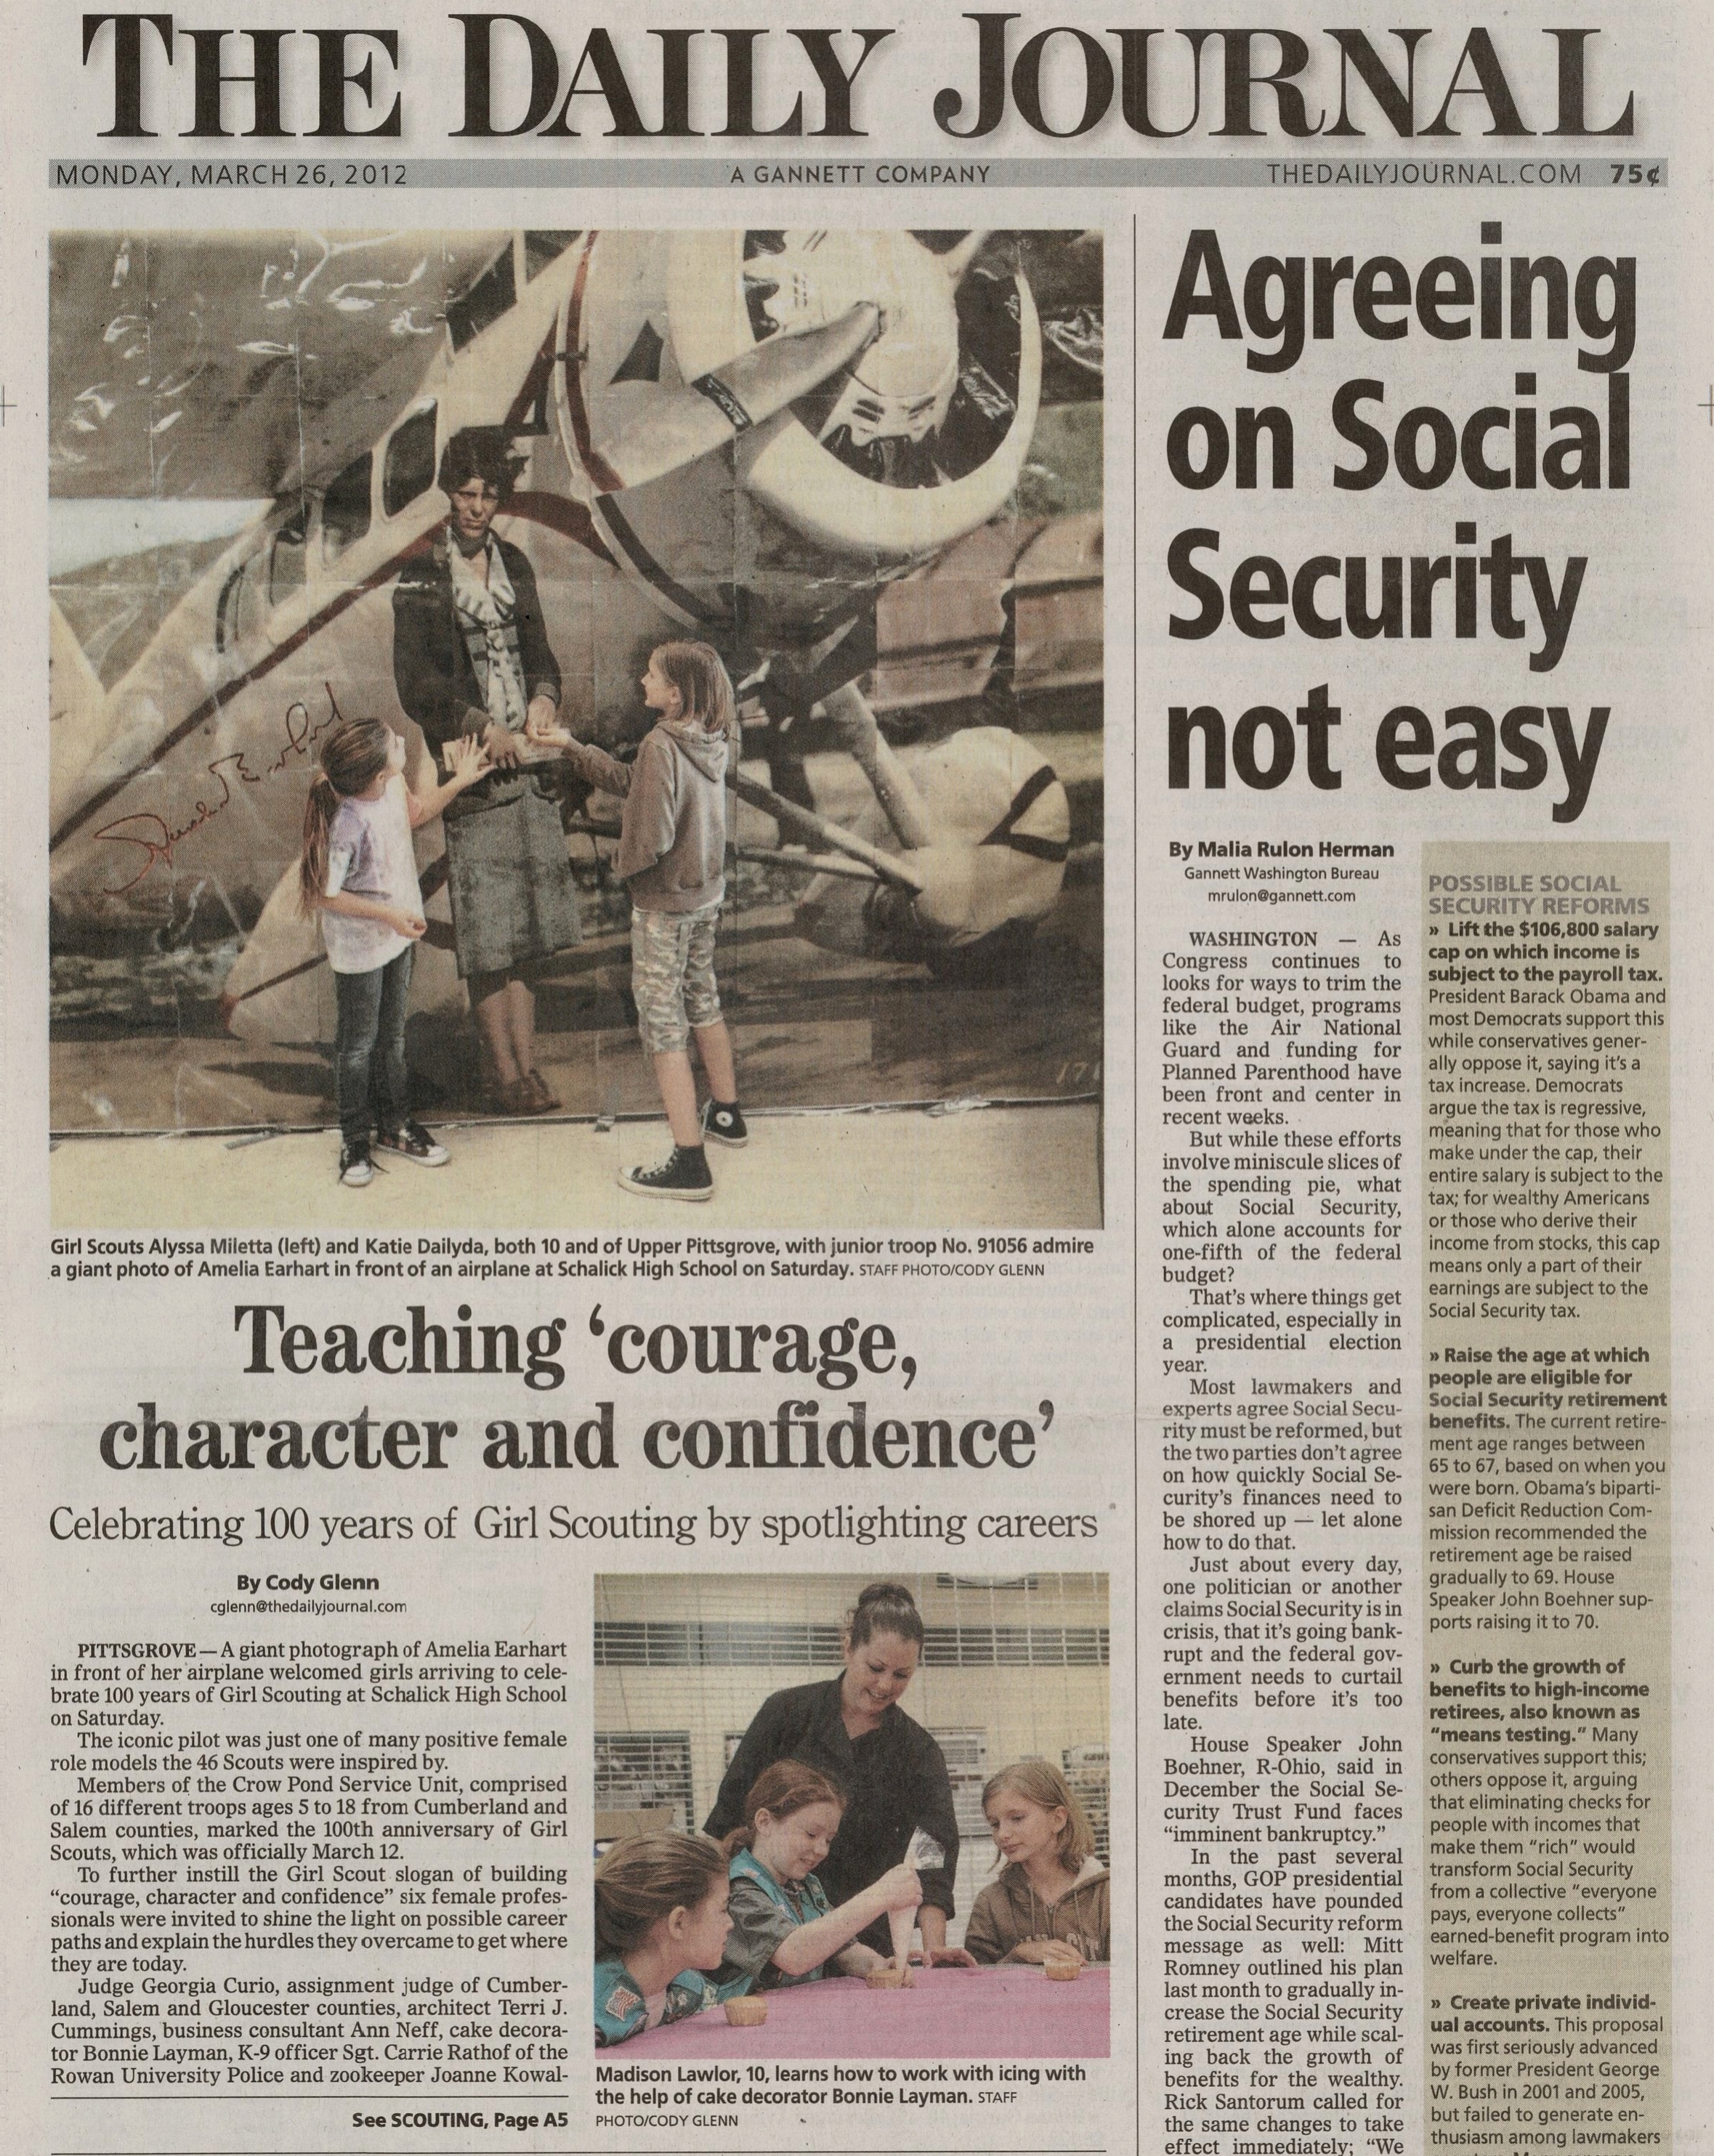  Celebrating 100 years of Girl Scouting in Pittsgrove Township March 26 2012 /  The Daily Journal  